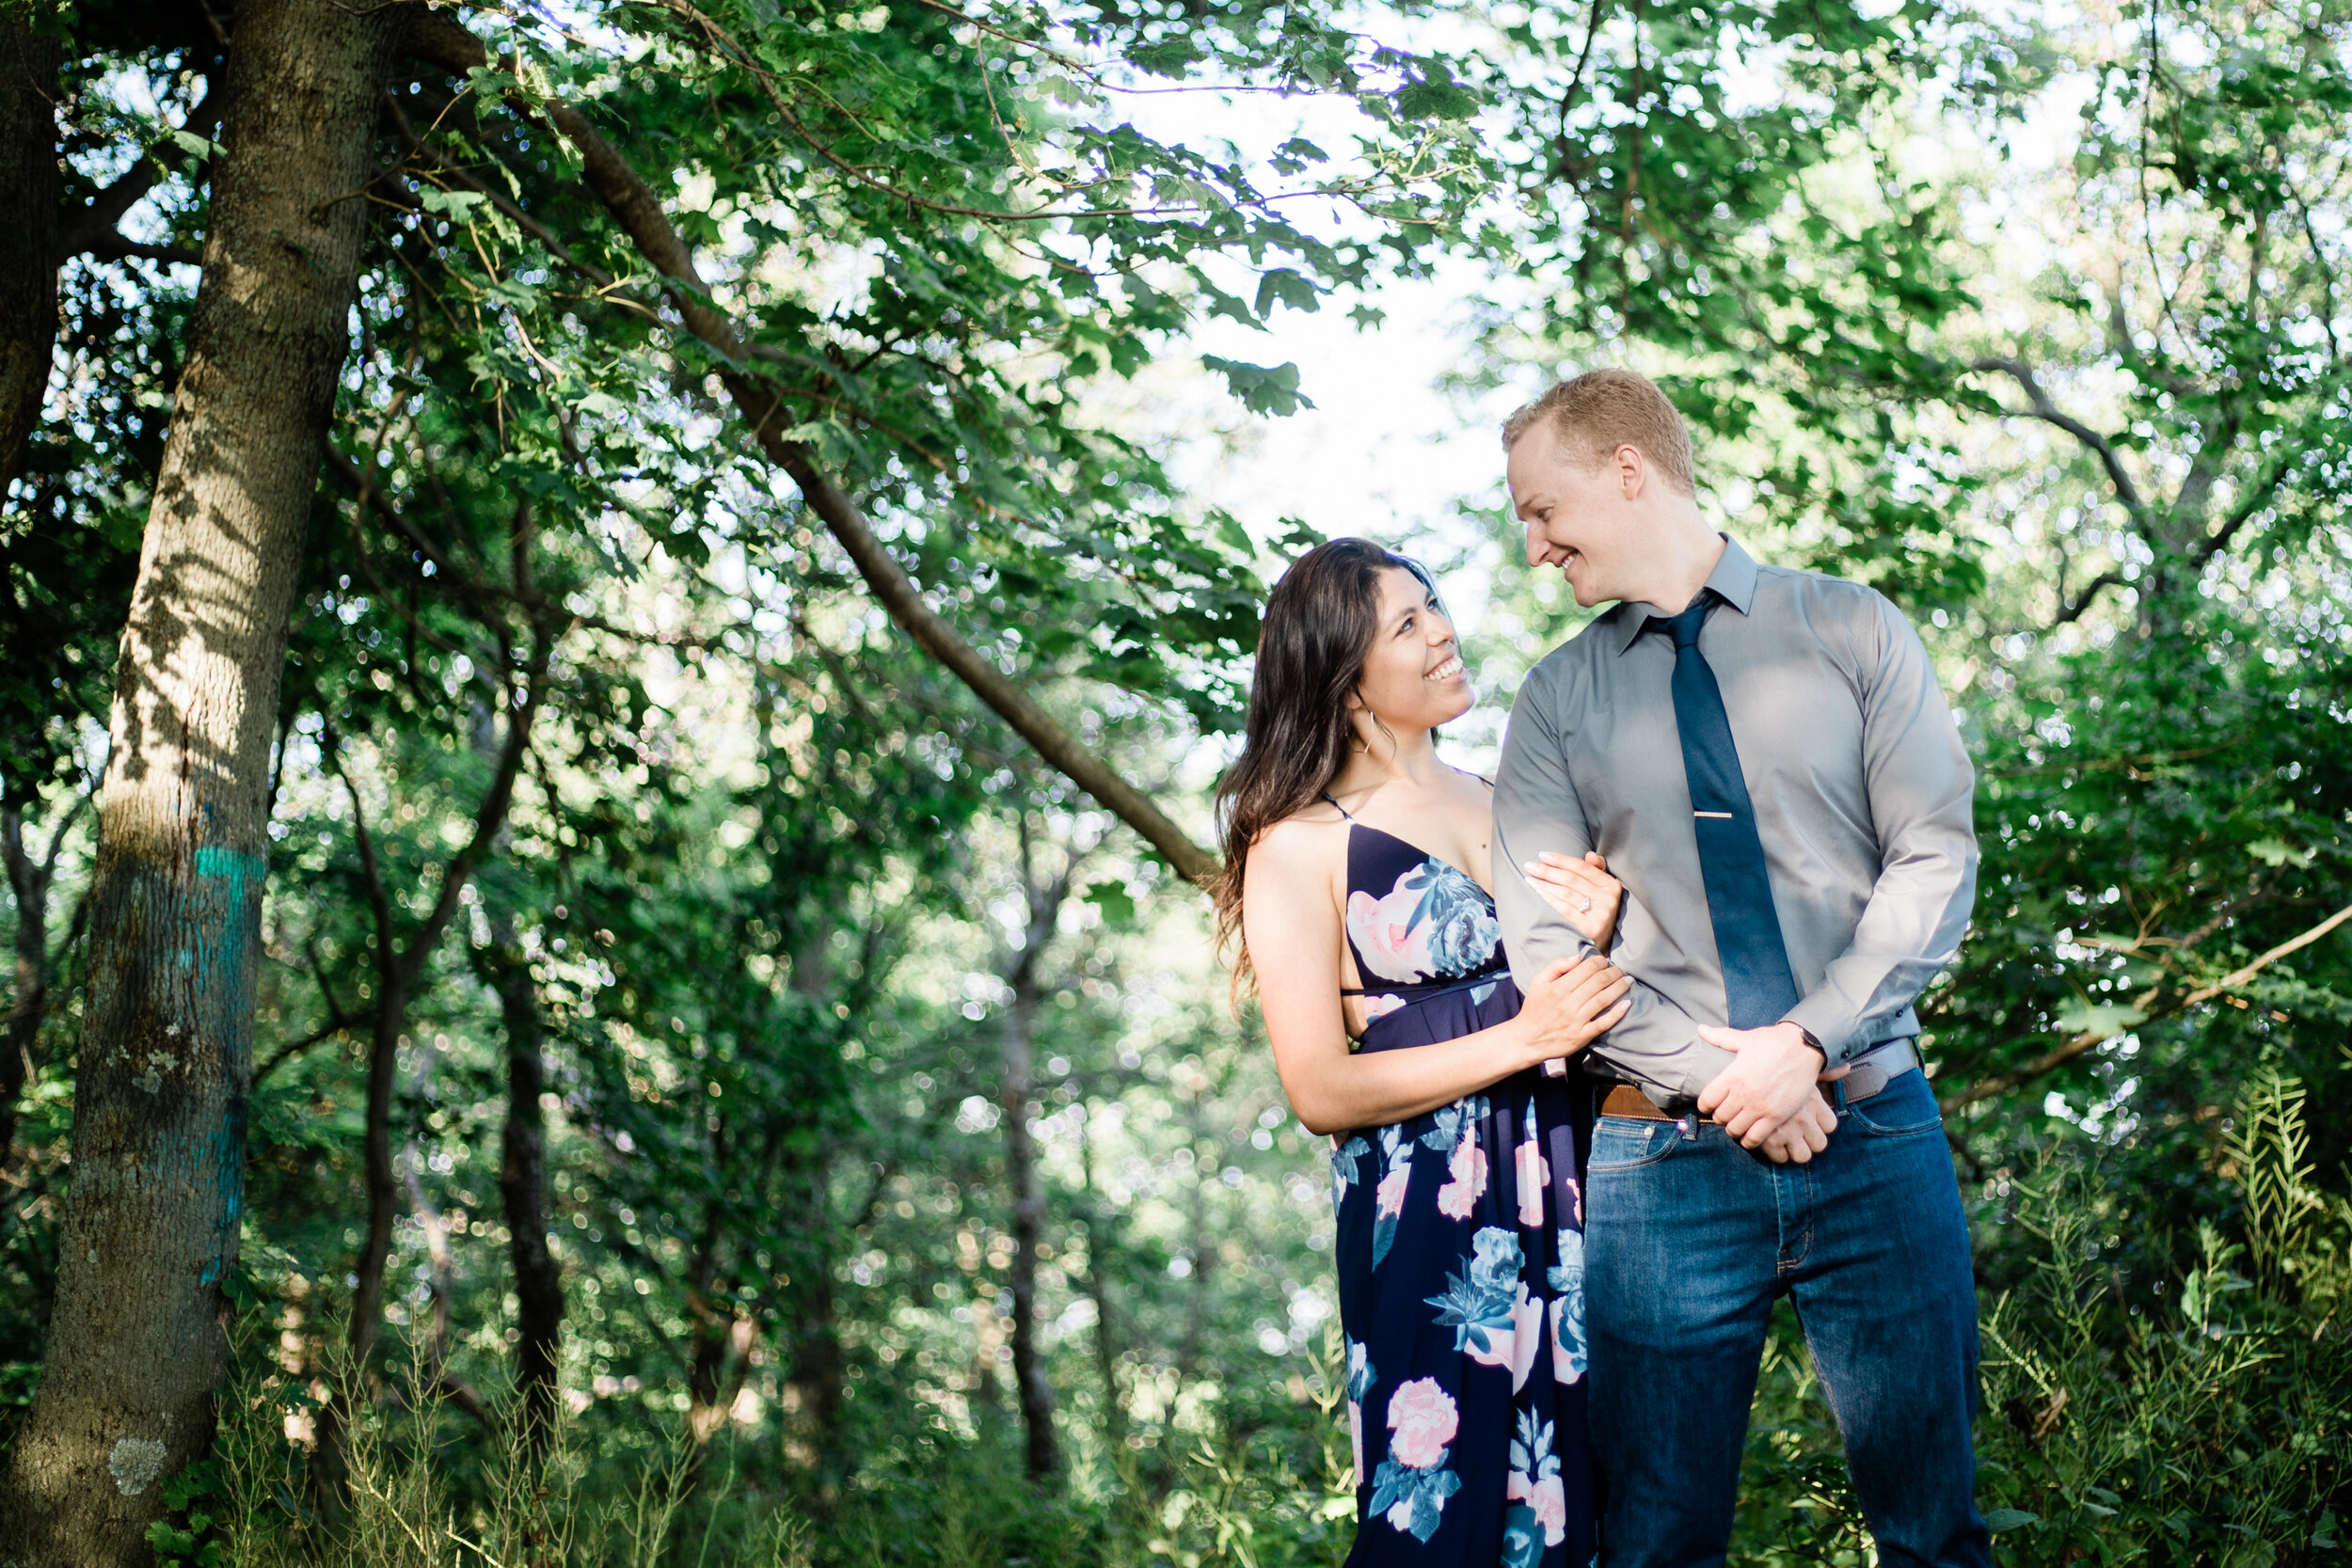 Engagement Session at High Rock Mountain in Western Maryland by Megapixels Media Photography best husband and wife wedding photographers-22.jpg